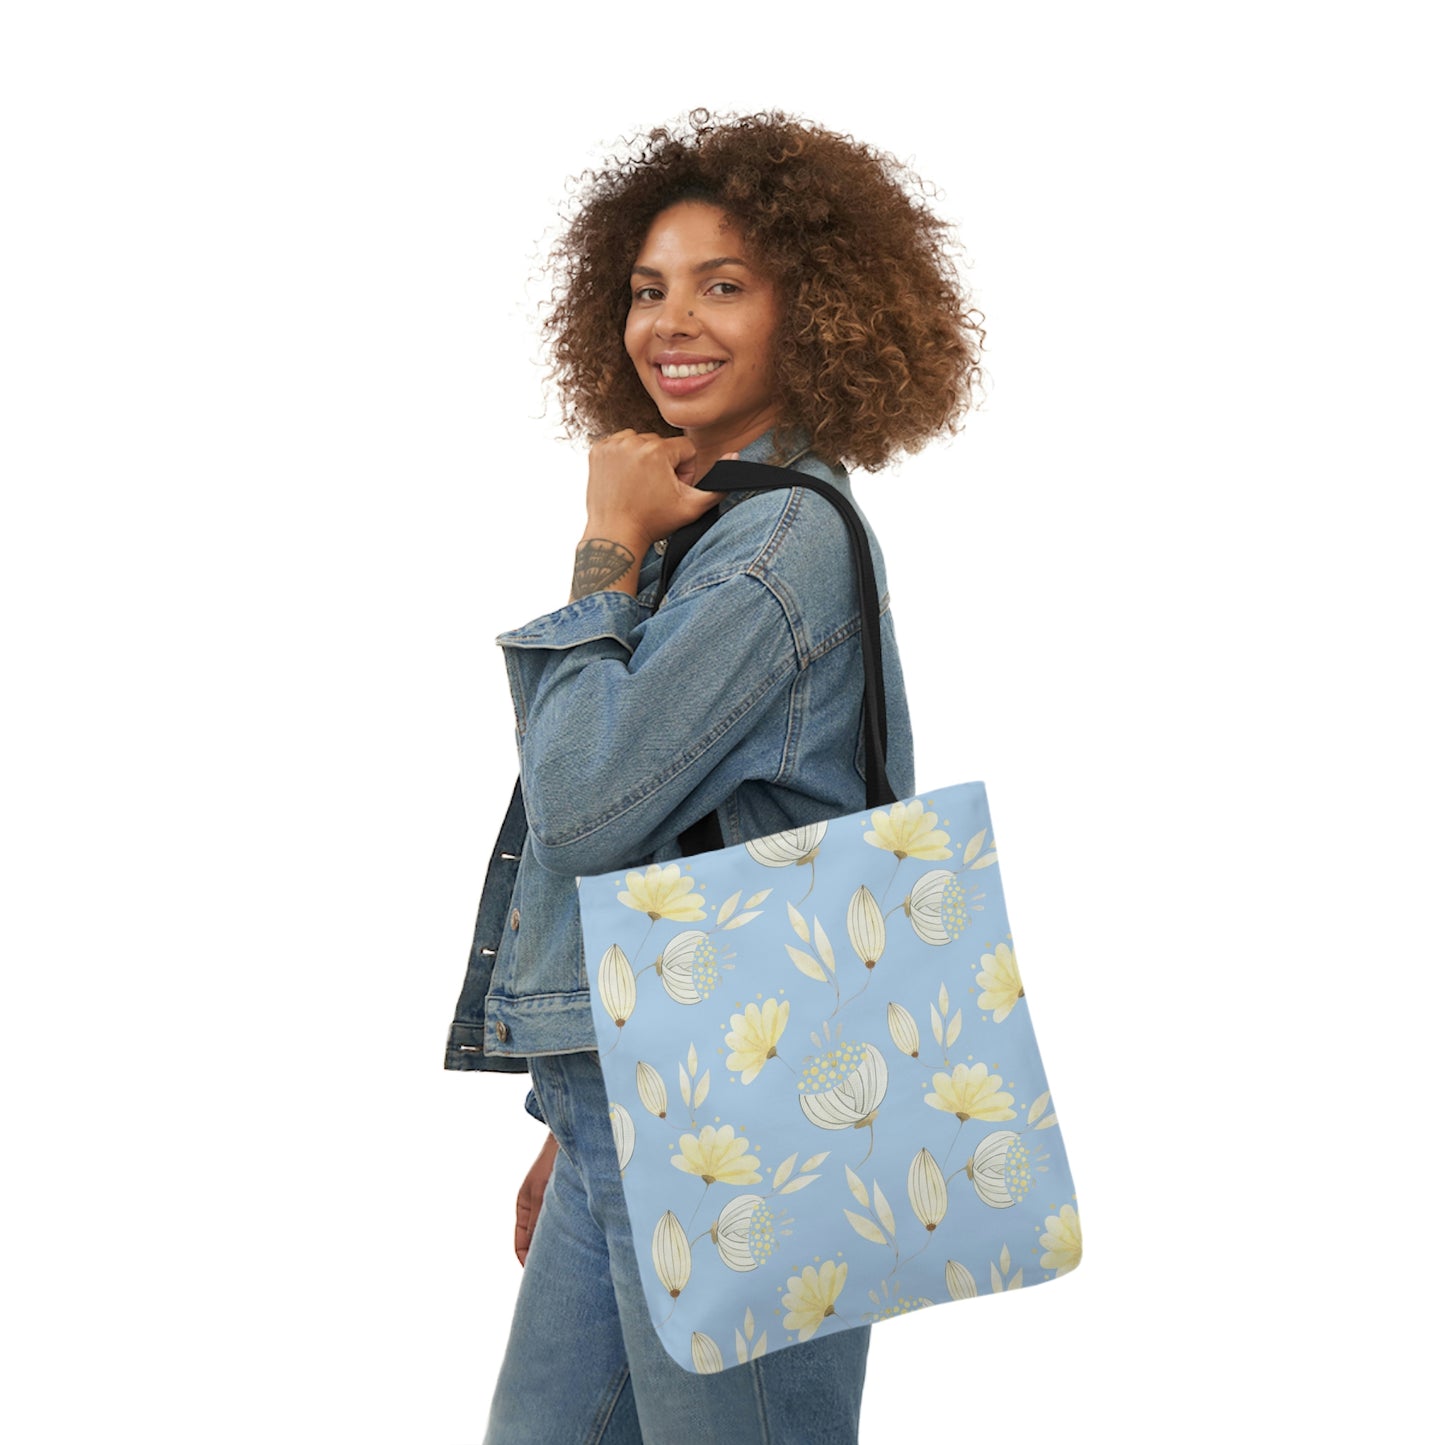 Yellow Flowers Polyester Canvas Tote Bag